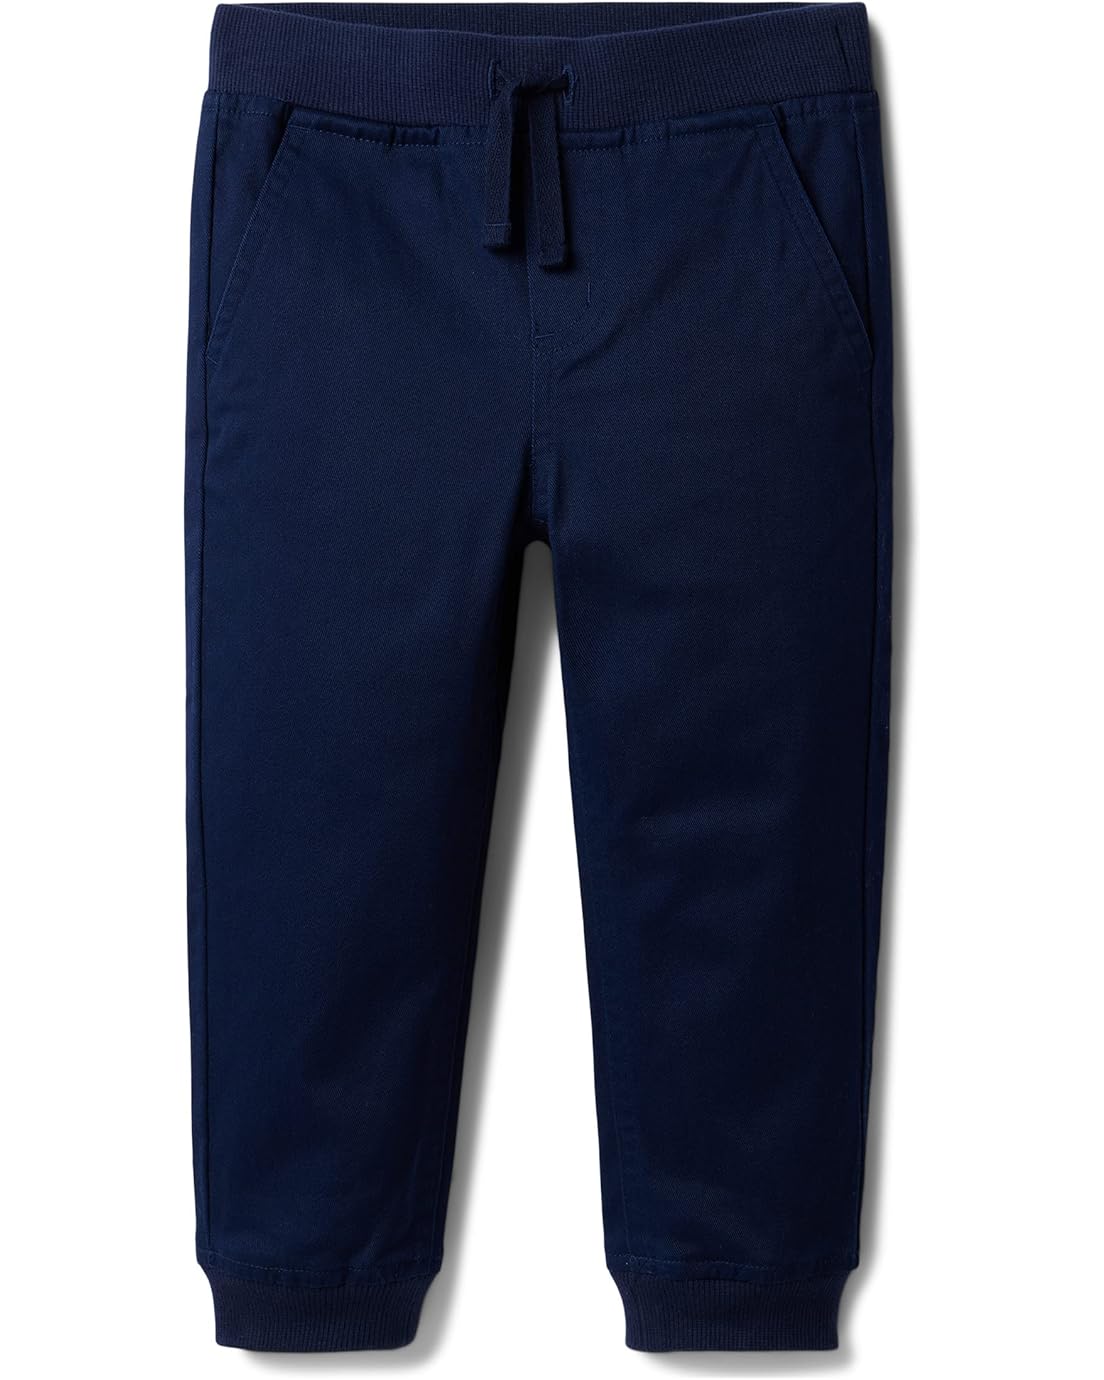 Janie and Jack Twill Pull-On Joggers (Toddler/Little Kids/Big Kids)